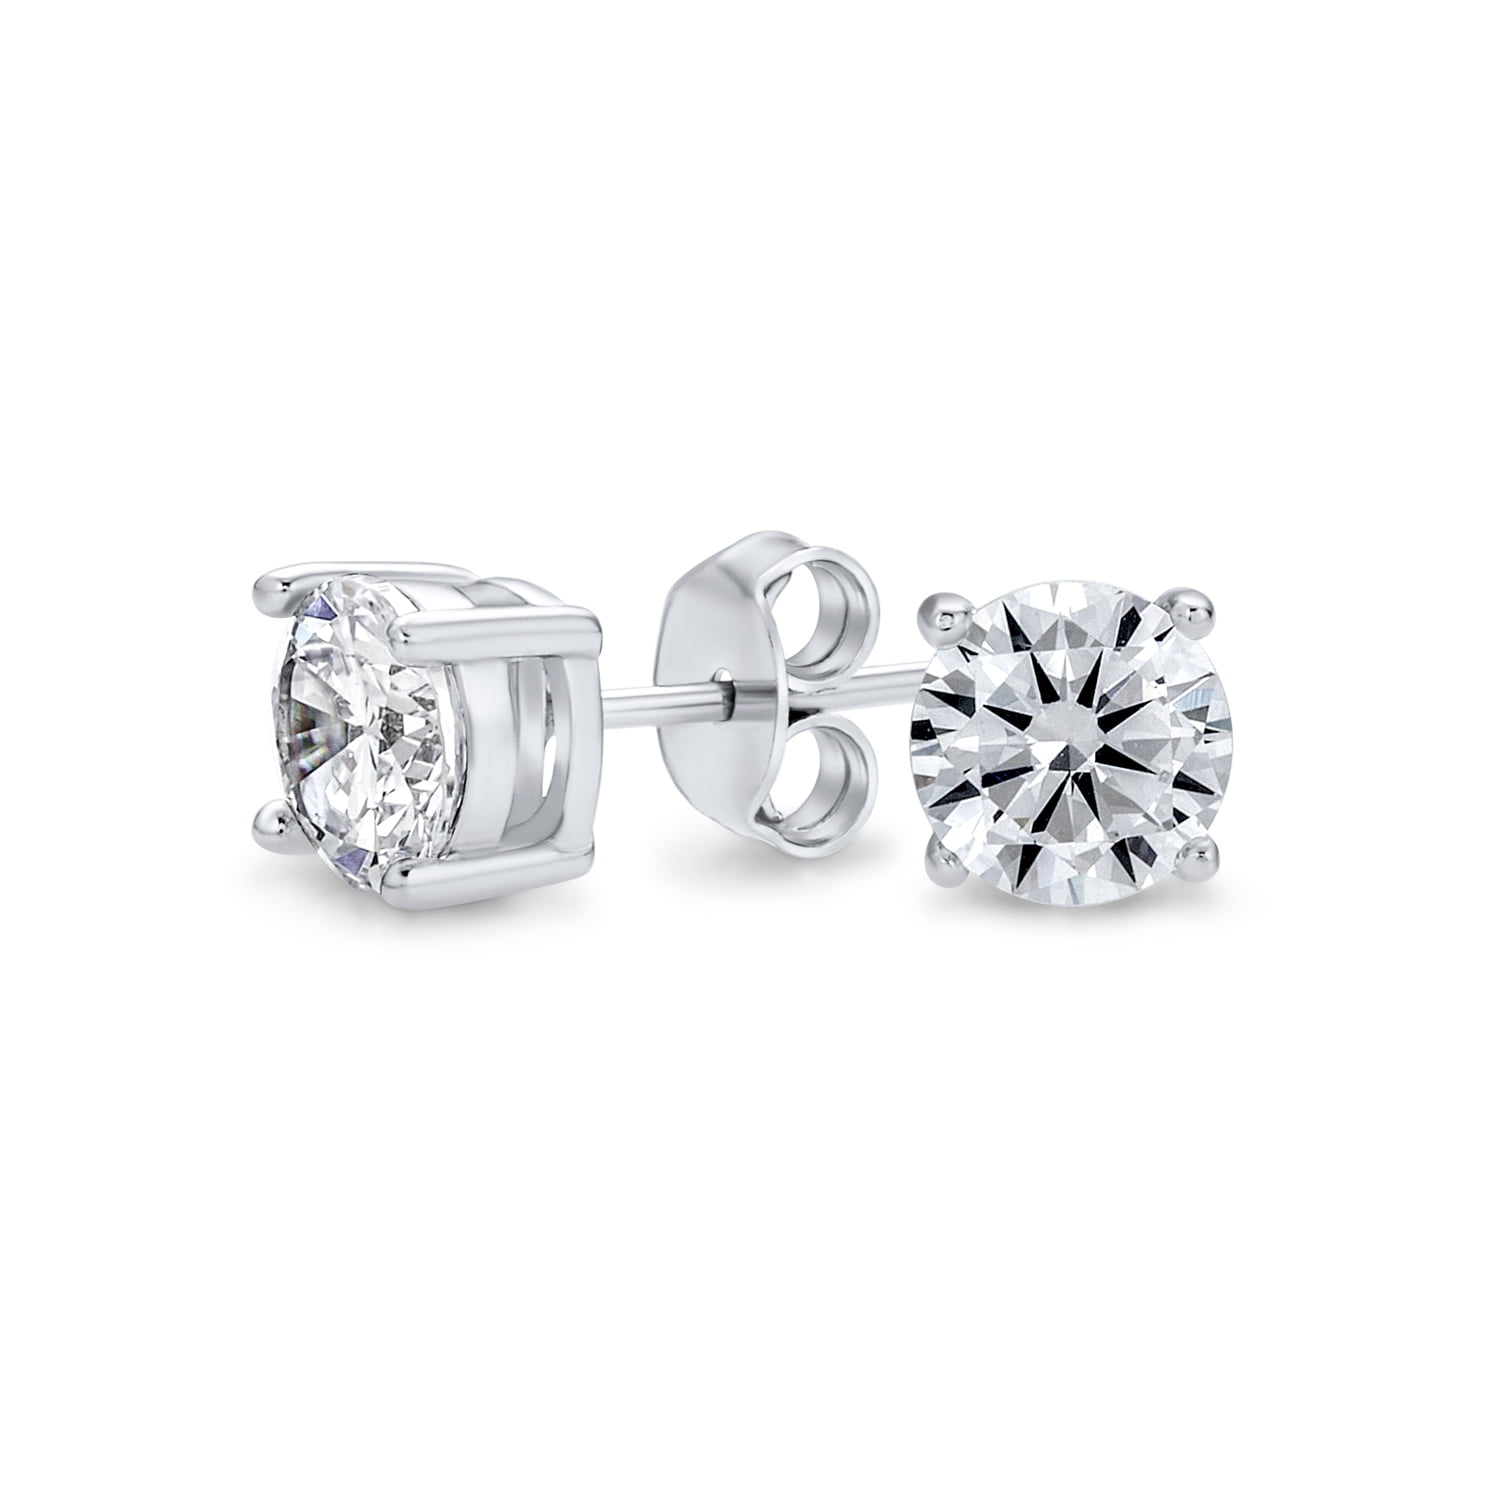 .925 Sterling Silver 4MM 4-Square Stone Square Shape CZ 4-Prong Post Stud Earrings